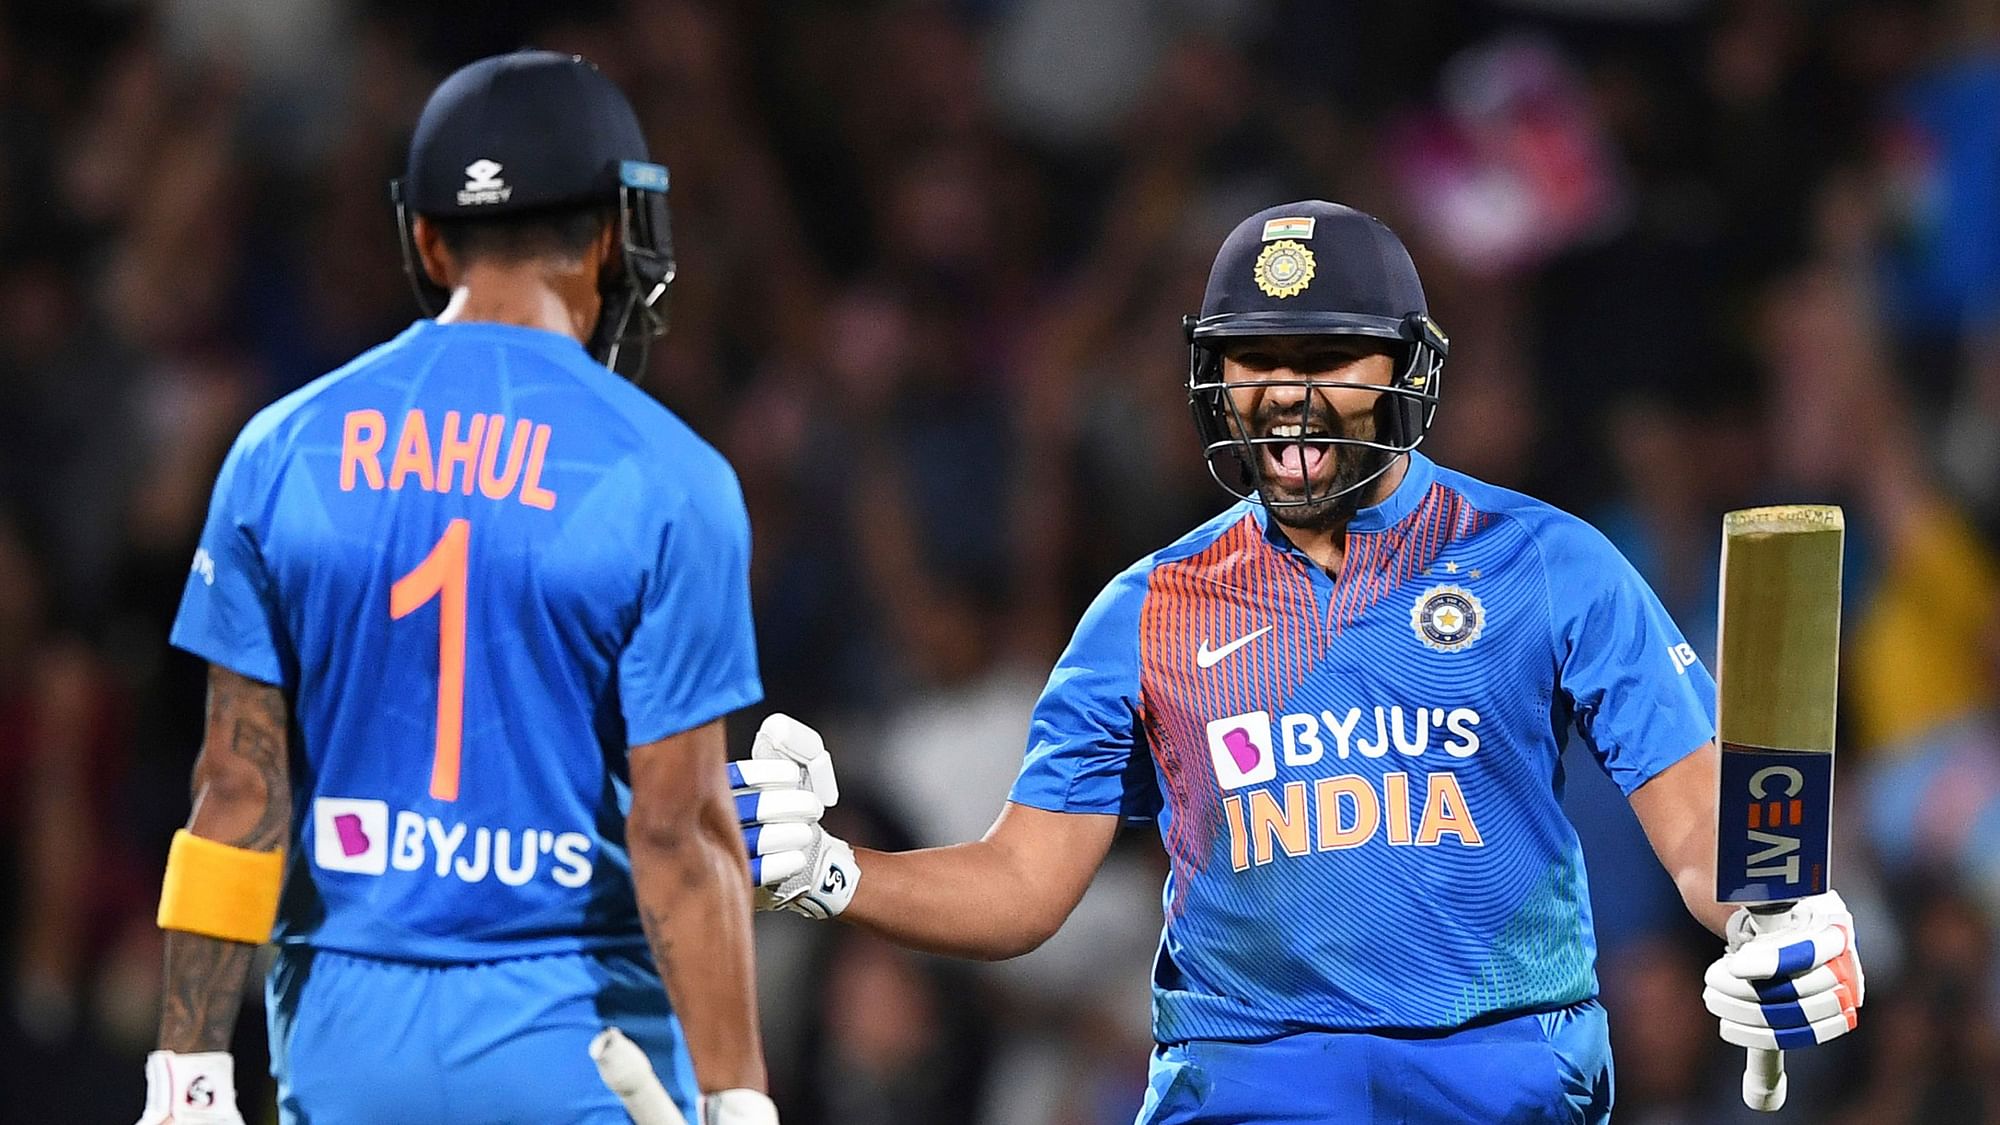 A look at the records and numbers from the final T20I and the five-match thrilling series between India and New Zealand.